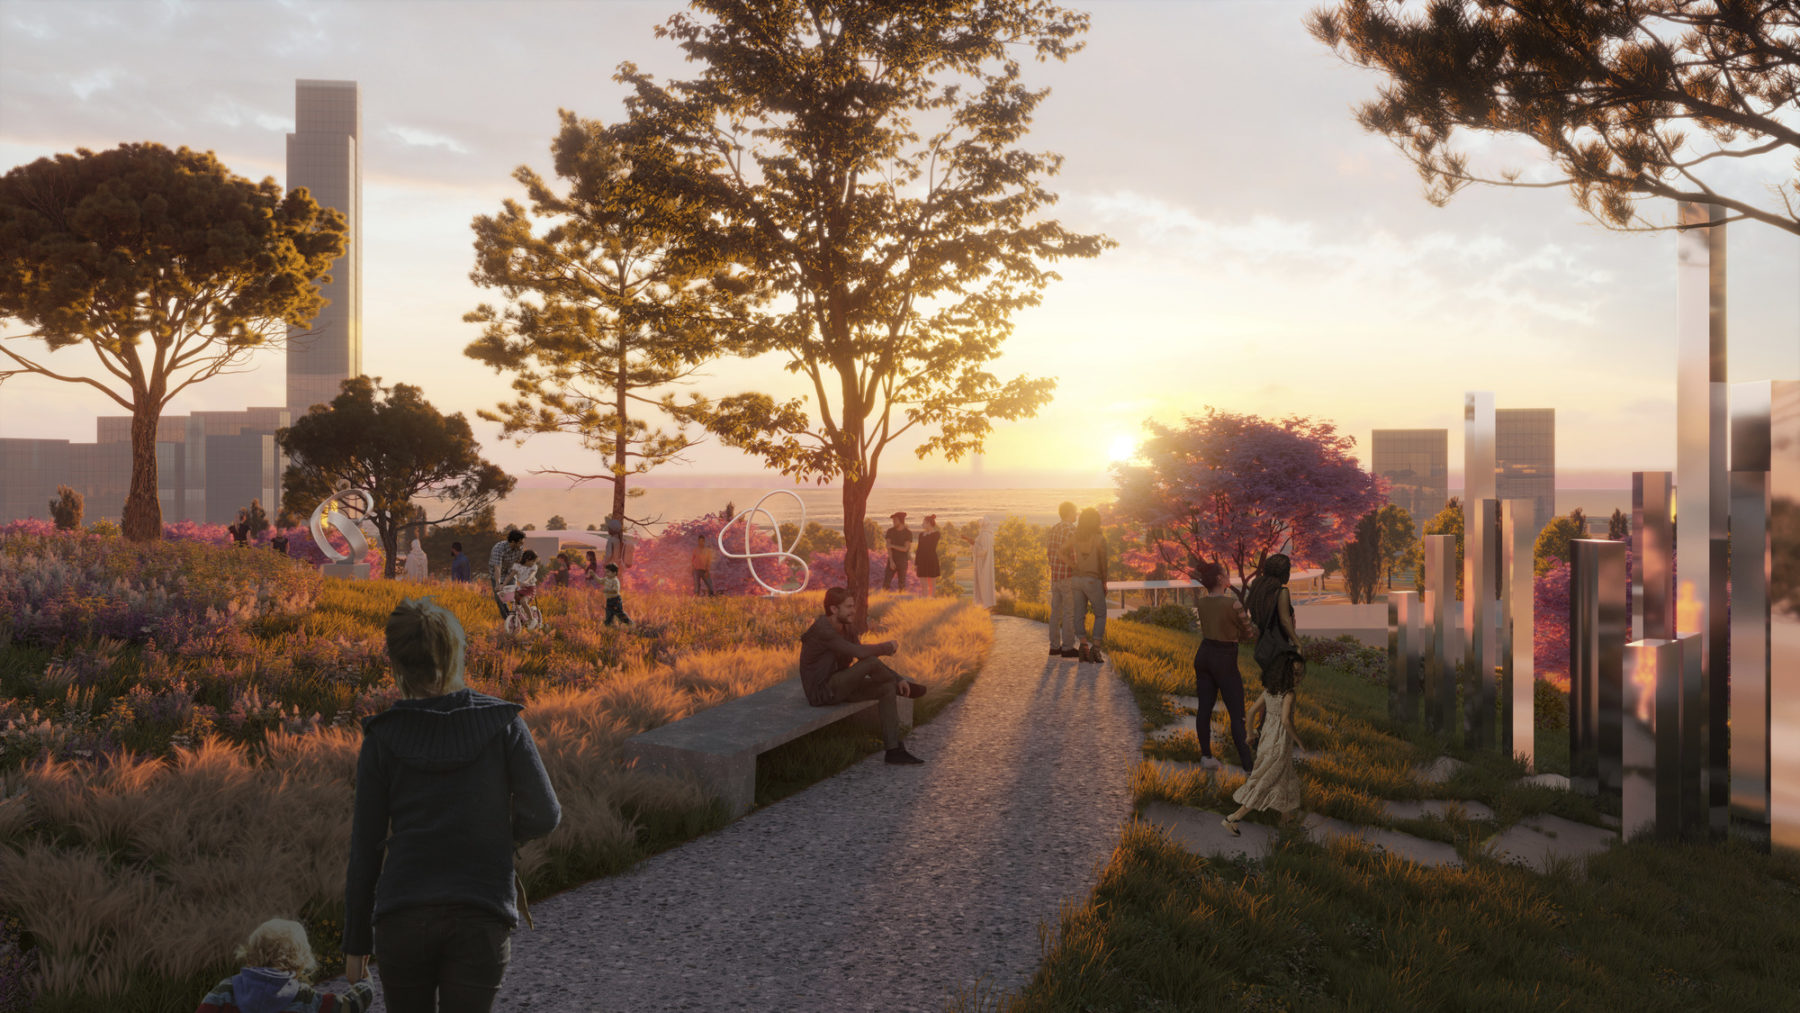 rendering of proposed path looking towards see with the sun setting. Sculptures line the path and people meander along it.